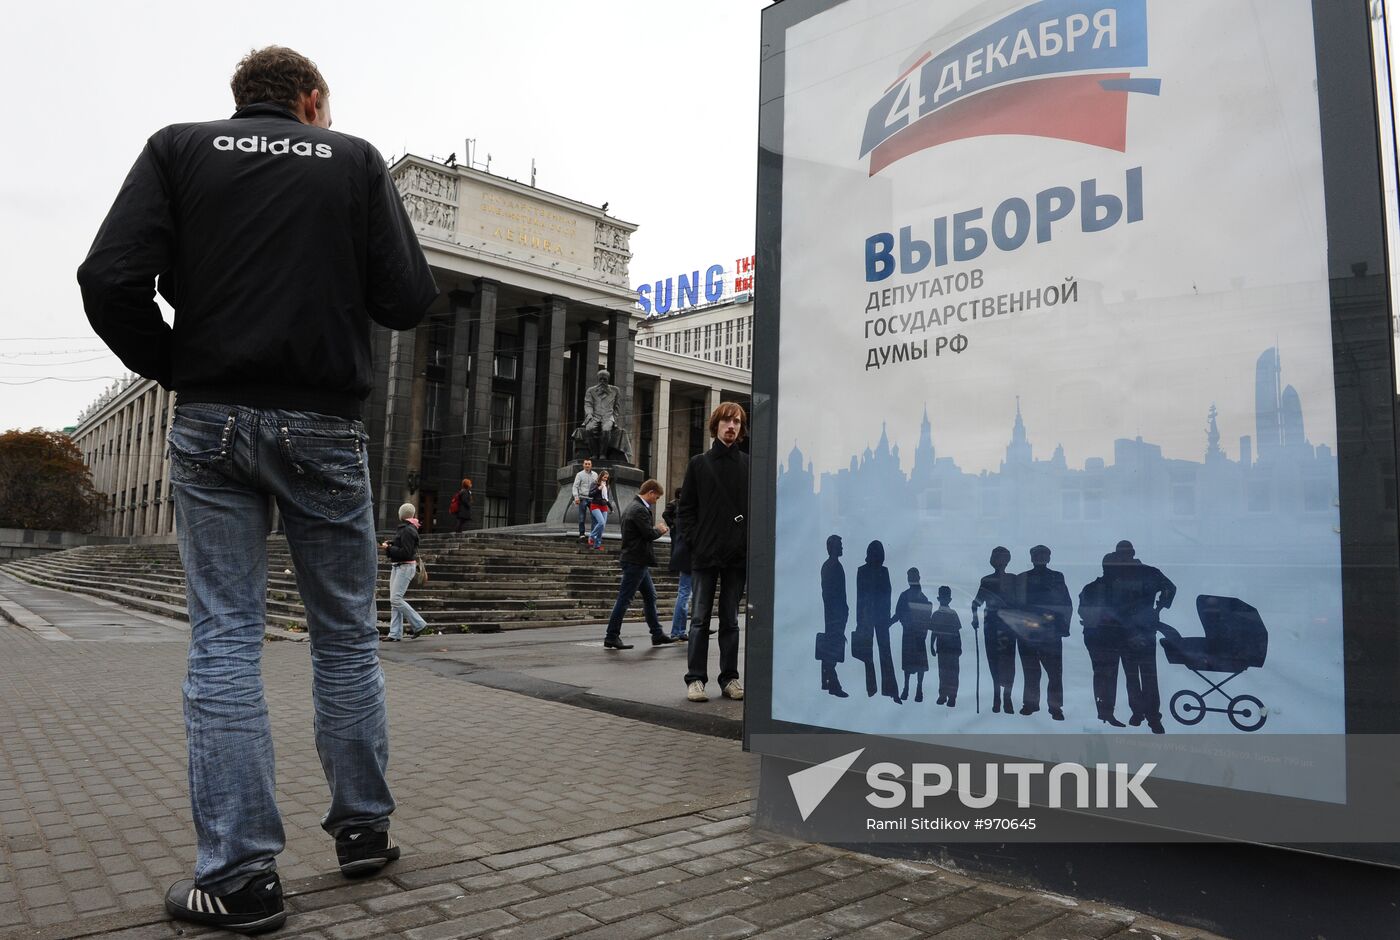 Election posters in Moscow streets